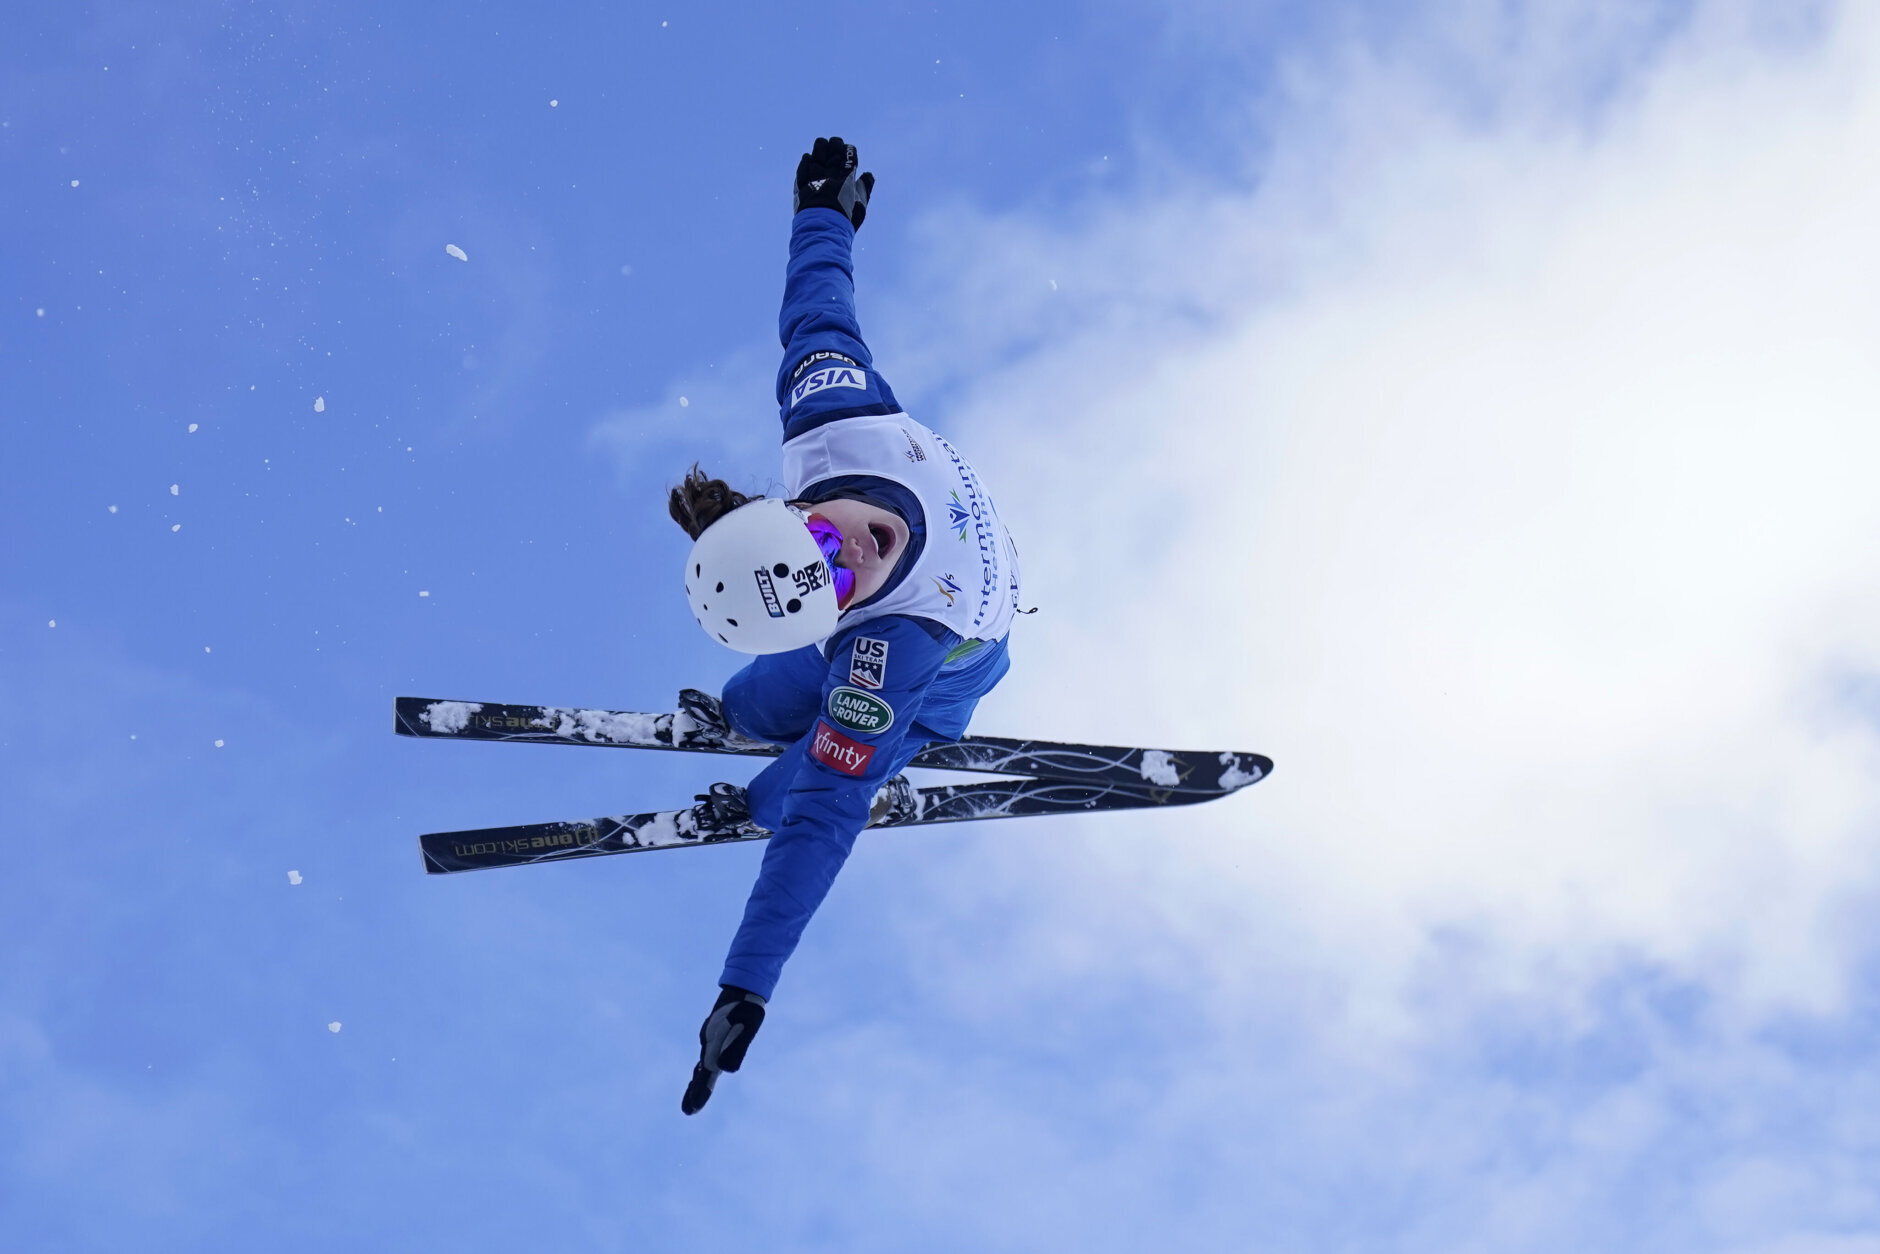 <p><strong><a href="https://www.teamusa.org/us-ski-and-snowboard/athletes/ashley-caldwell" target="_blank" rel="noopener">Ashley Caldwell</a>, freestyle skiing (Ashburn, Virginia)</strong></p>
<p>Caldwell enters her fourth Winter Games in search of redemption. In 2018, she came up short on her jump and did not qualify for the final. Caldwell had finished in the top 10 in her previous two Olympic appearances and looks for her first medal in 2022.</p>
<p><strong>Events:</strong> Finished in 4th place in Women&#8217;s Aerials; Part of gold-medal-winning U.S. team in Mixed Team Aerials</p>
